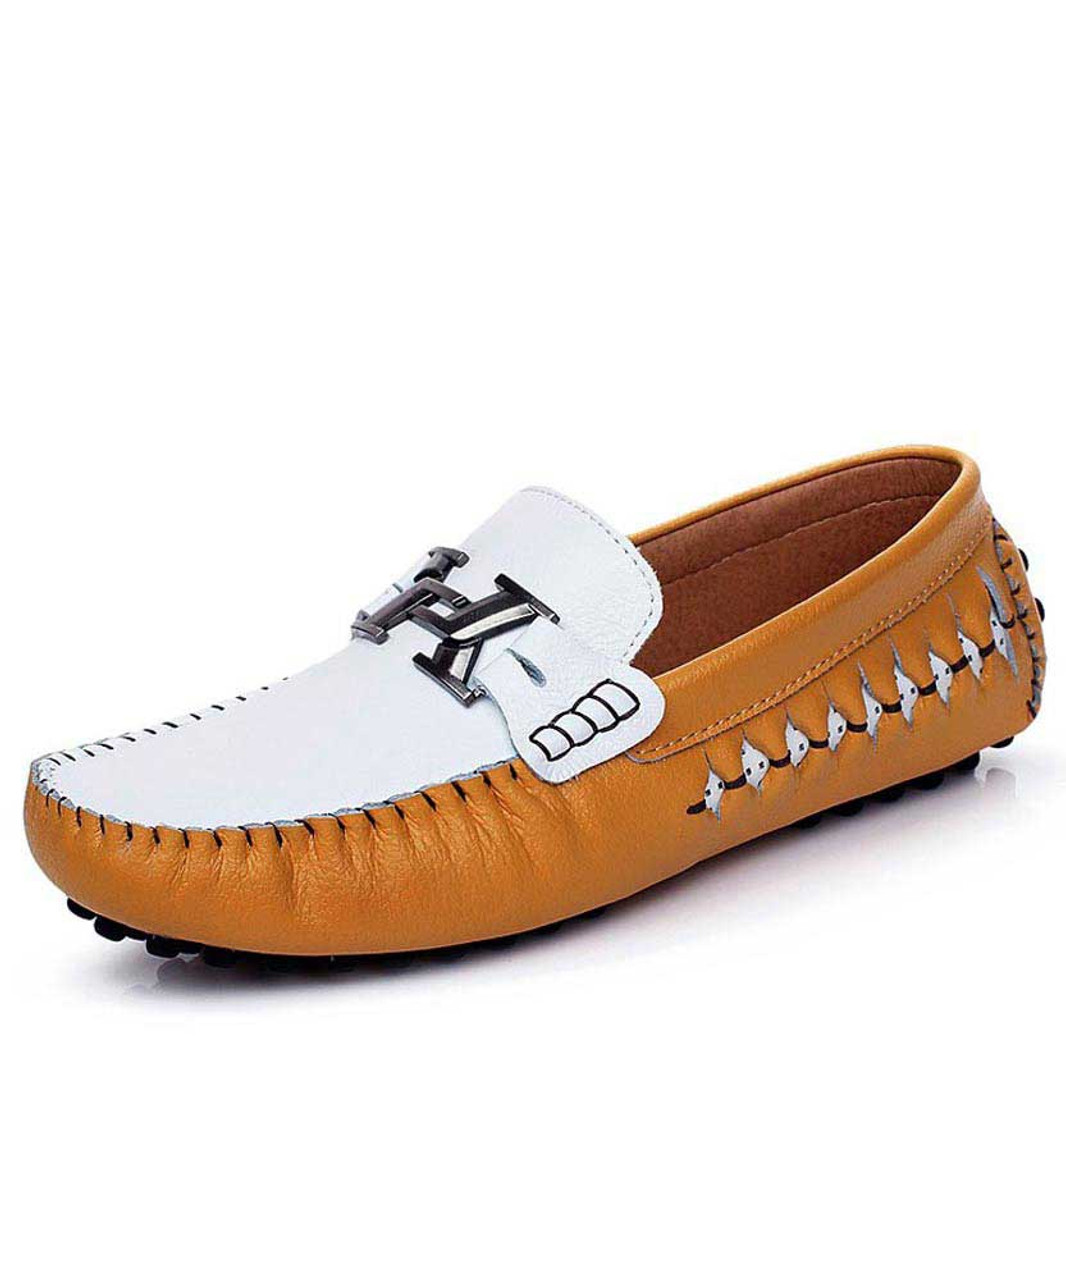 White blue metal buckle hollow leather slip on shoe loafer